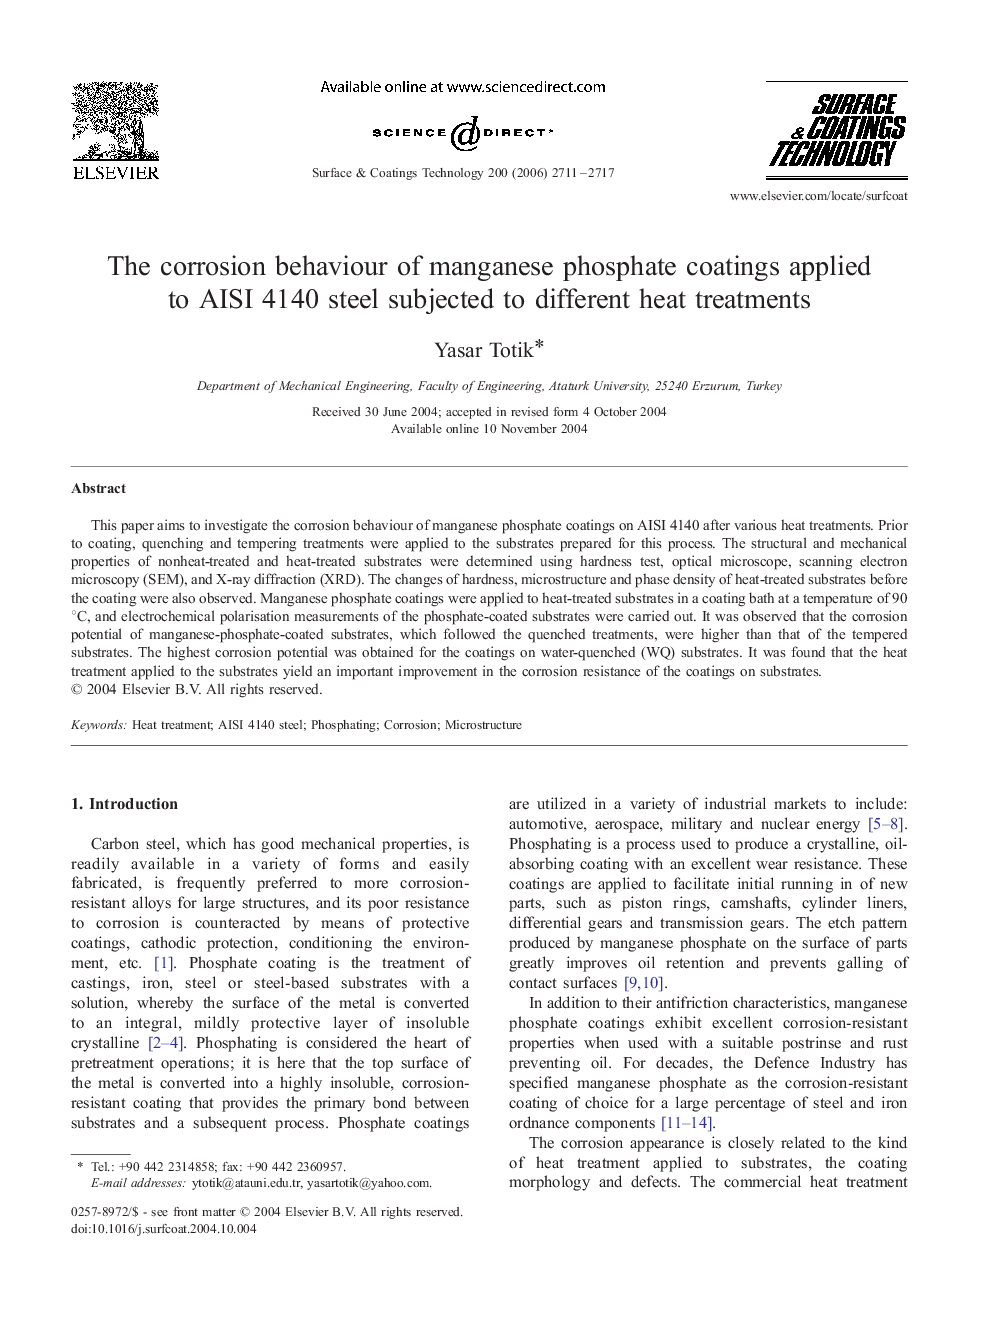 The corrosion behaviour of manganese phosphate coatings applied to AISI 4140 steel subjected to different heat treatments